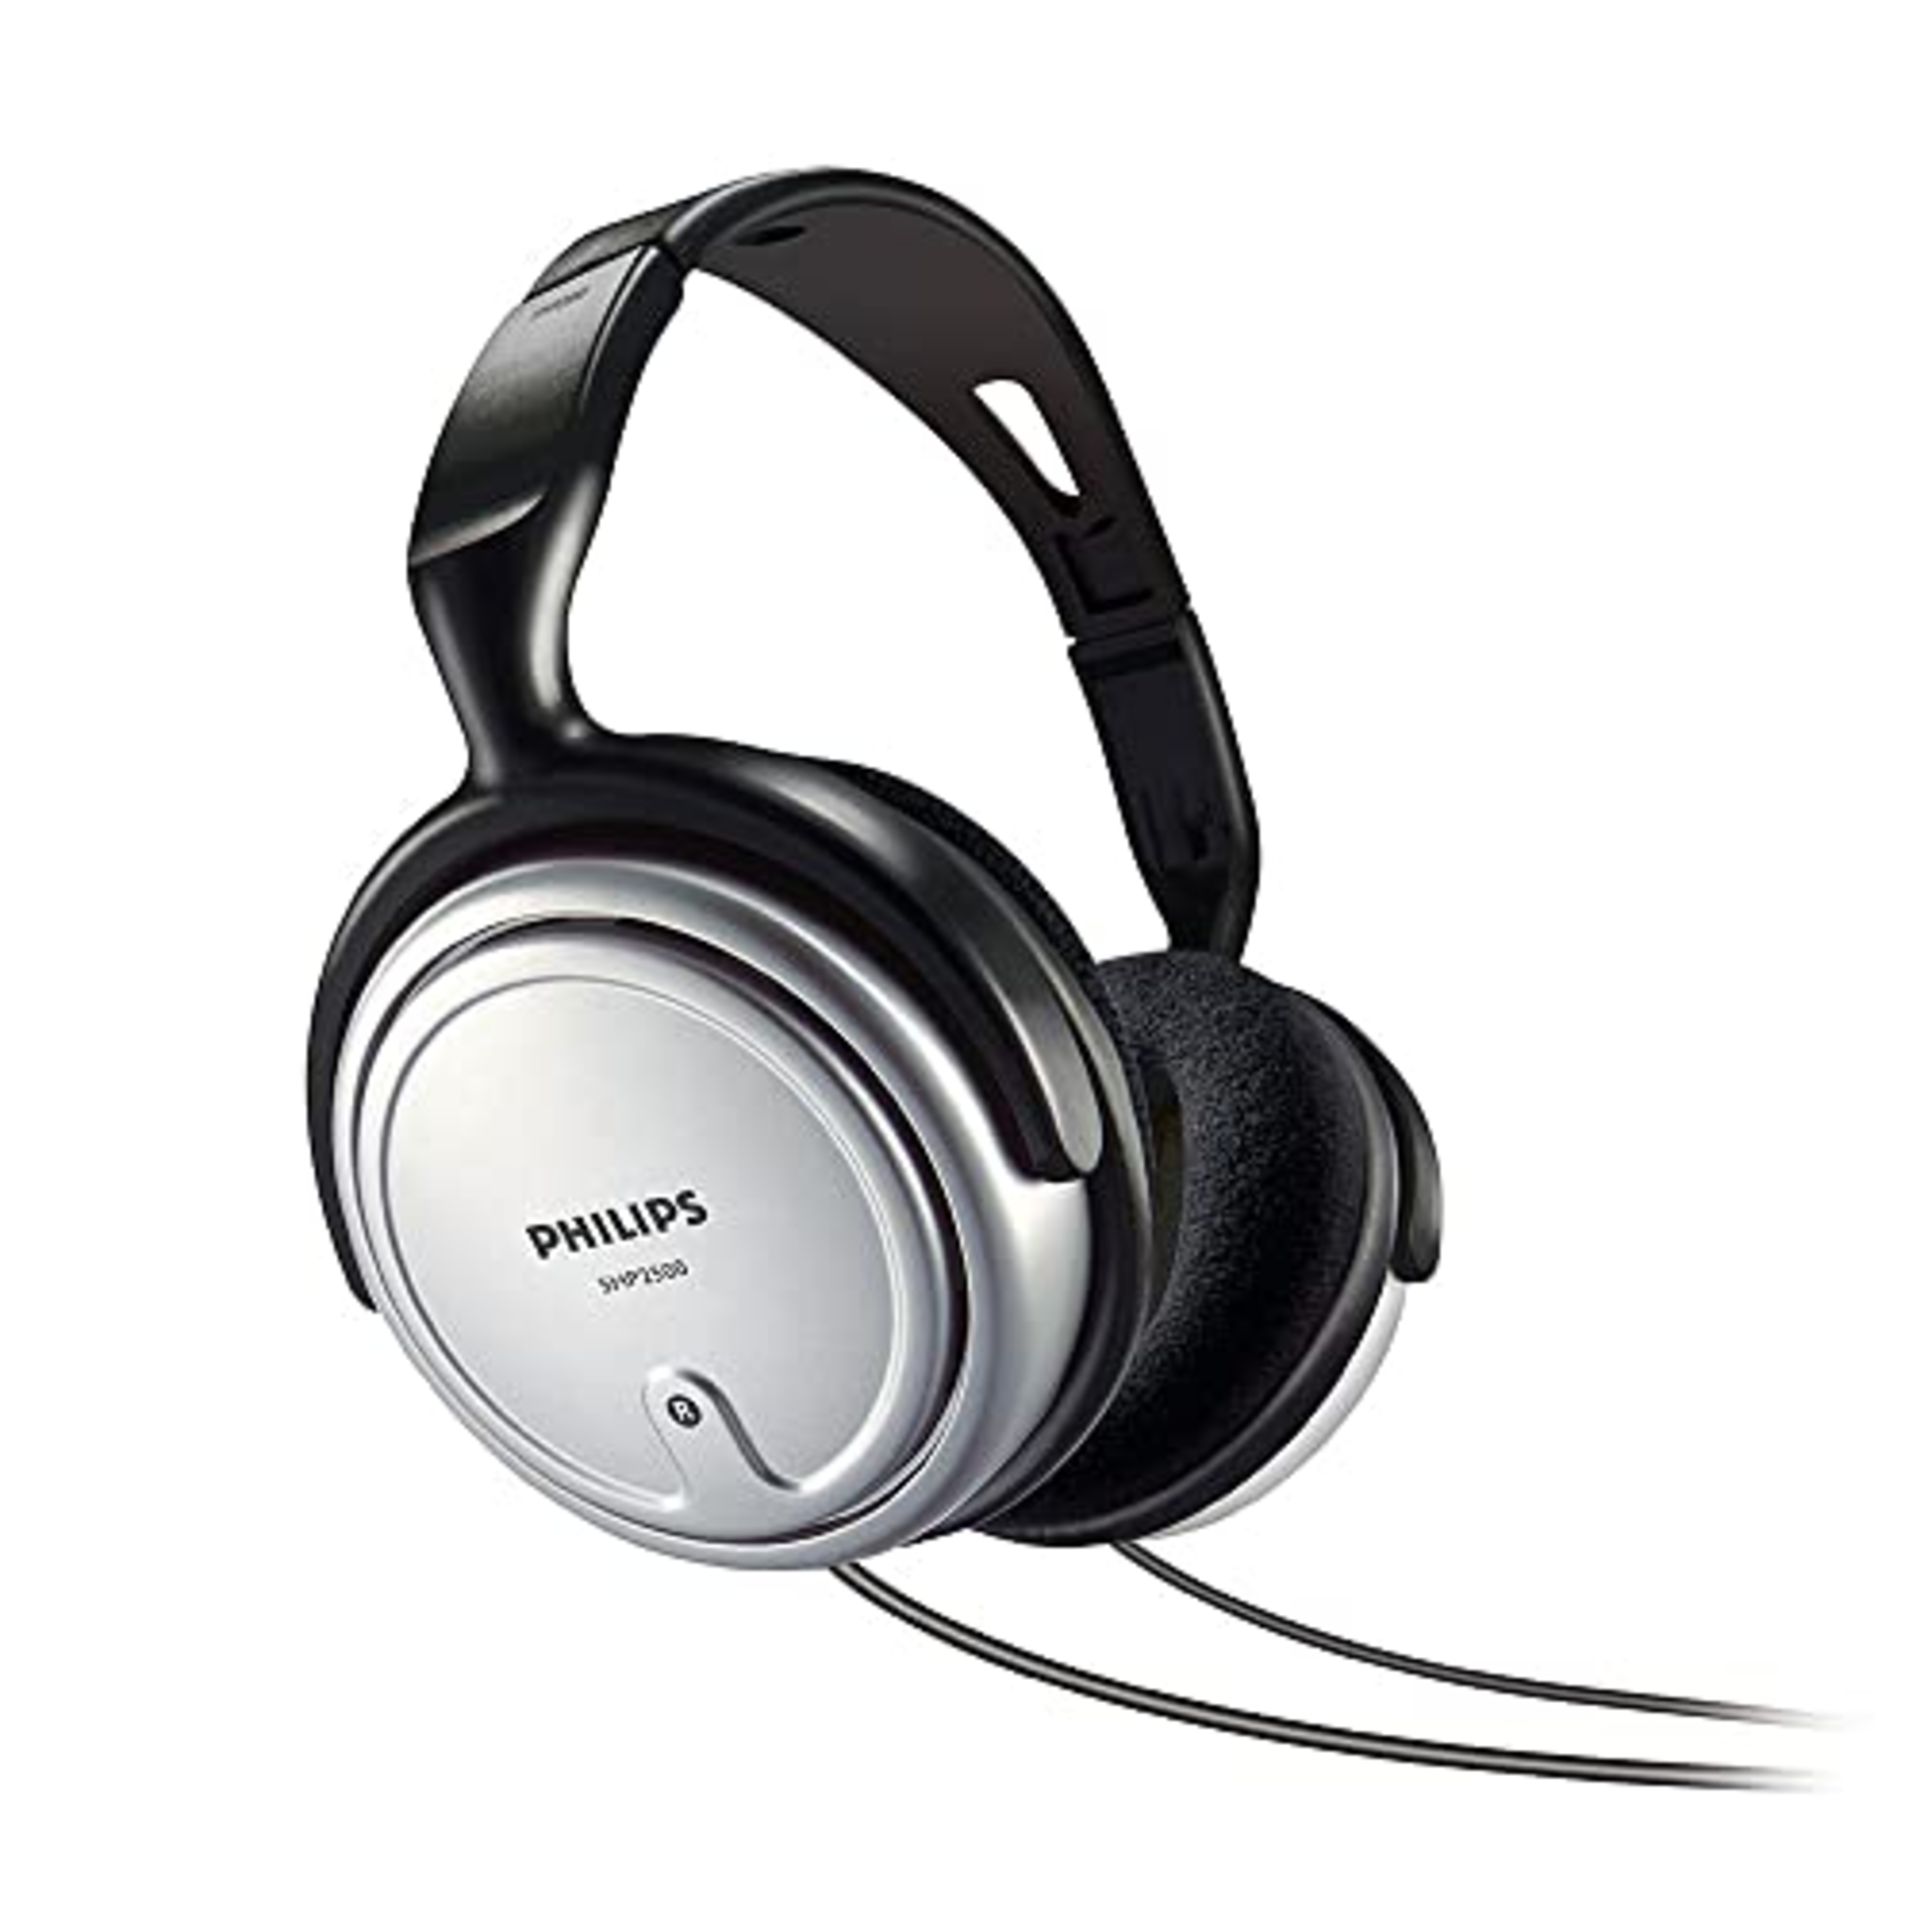 Philips SHP2500 Wired TV Headphones, 6 Meter Cable, Integrated Volume Control, Comfort - Image 4 of 6